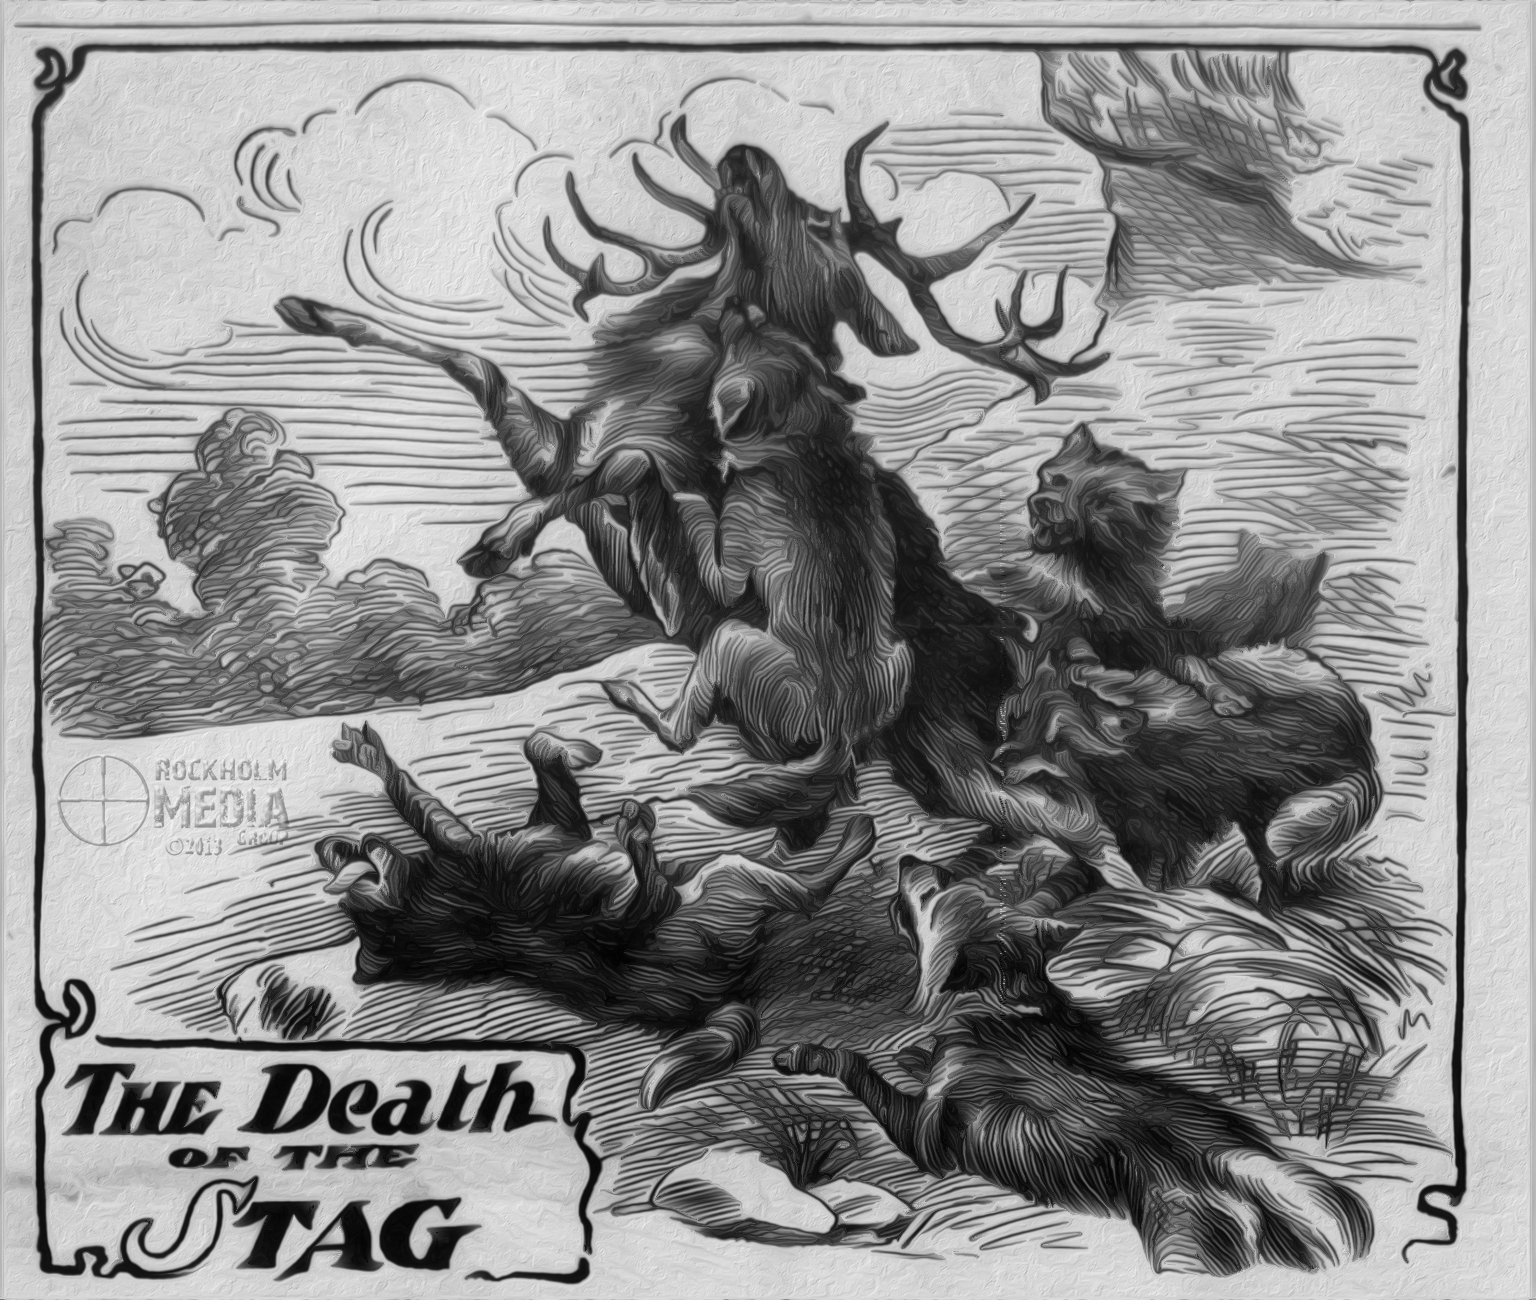 Death of a Stag with watermark.jpg